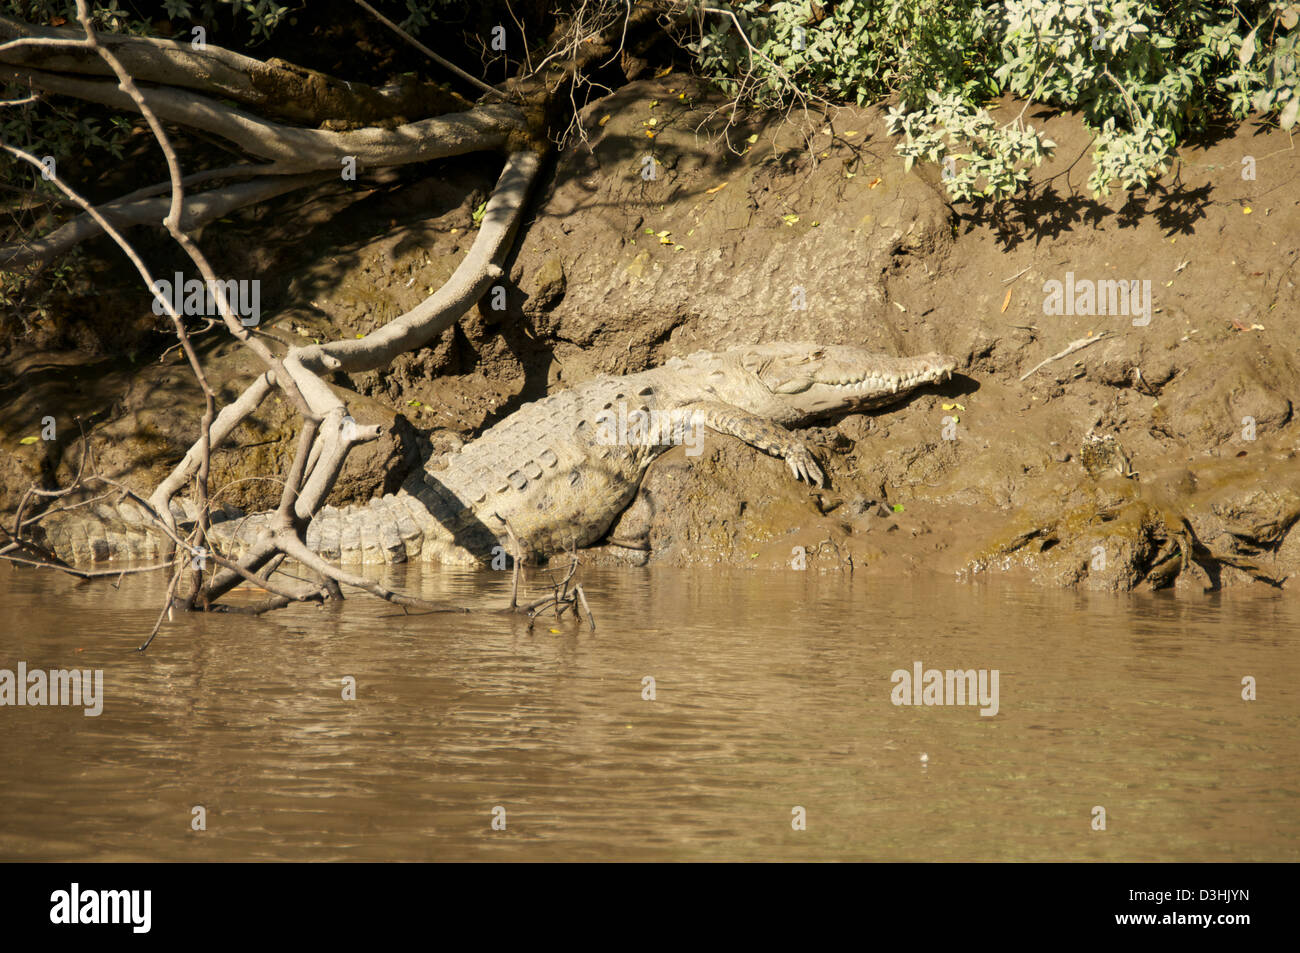 Crocodile on the river of Palo Verde National Park, Costa Rica Stock Photo